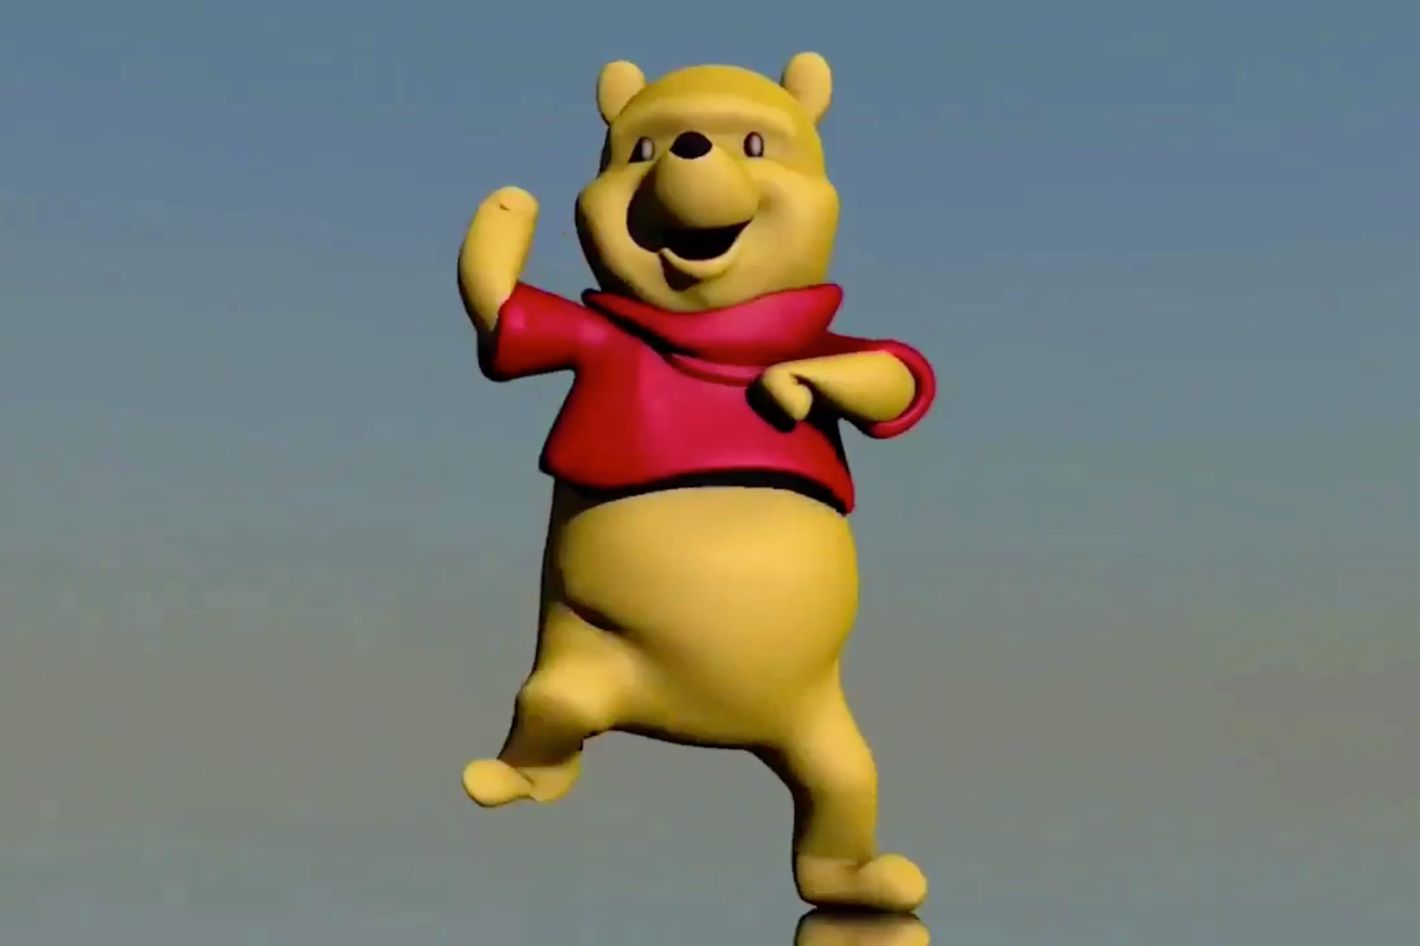 Winnie The Pooh Dancing Meme Takes Over Twitter